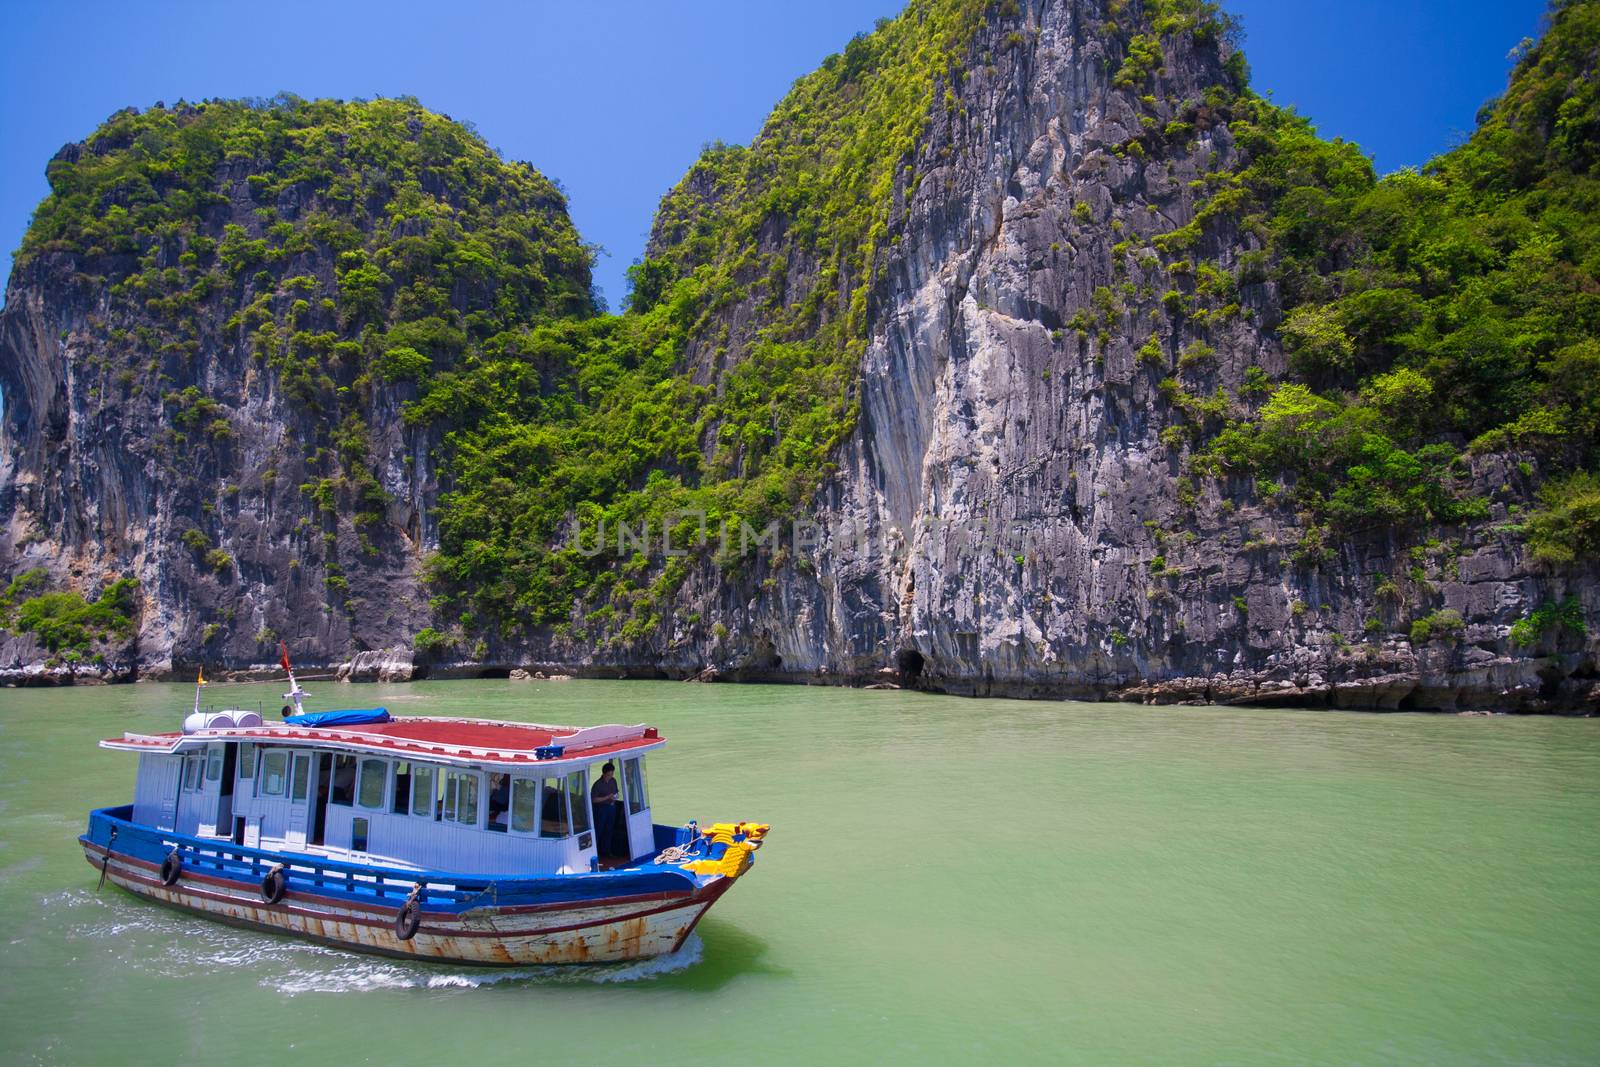 Popular famous tourist attraction in Vietnam. Tourist junk boat floating among limestone rocks at Halong Bay, Hanoi , South China Sea, landmark of Vietnam, Southeast Asia by asiandelight